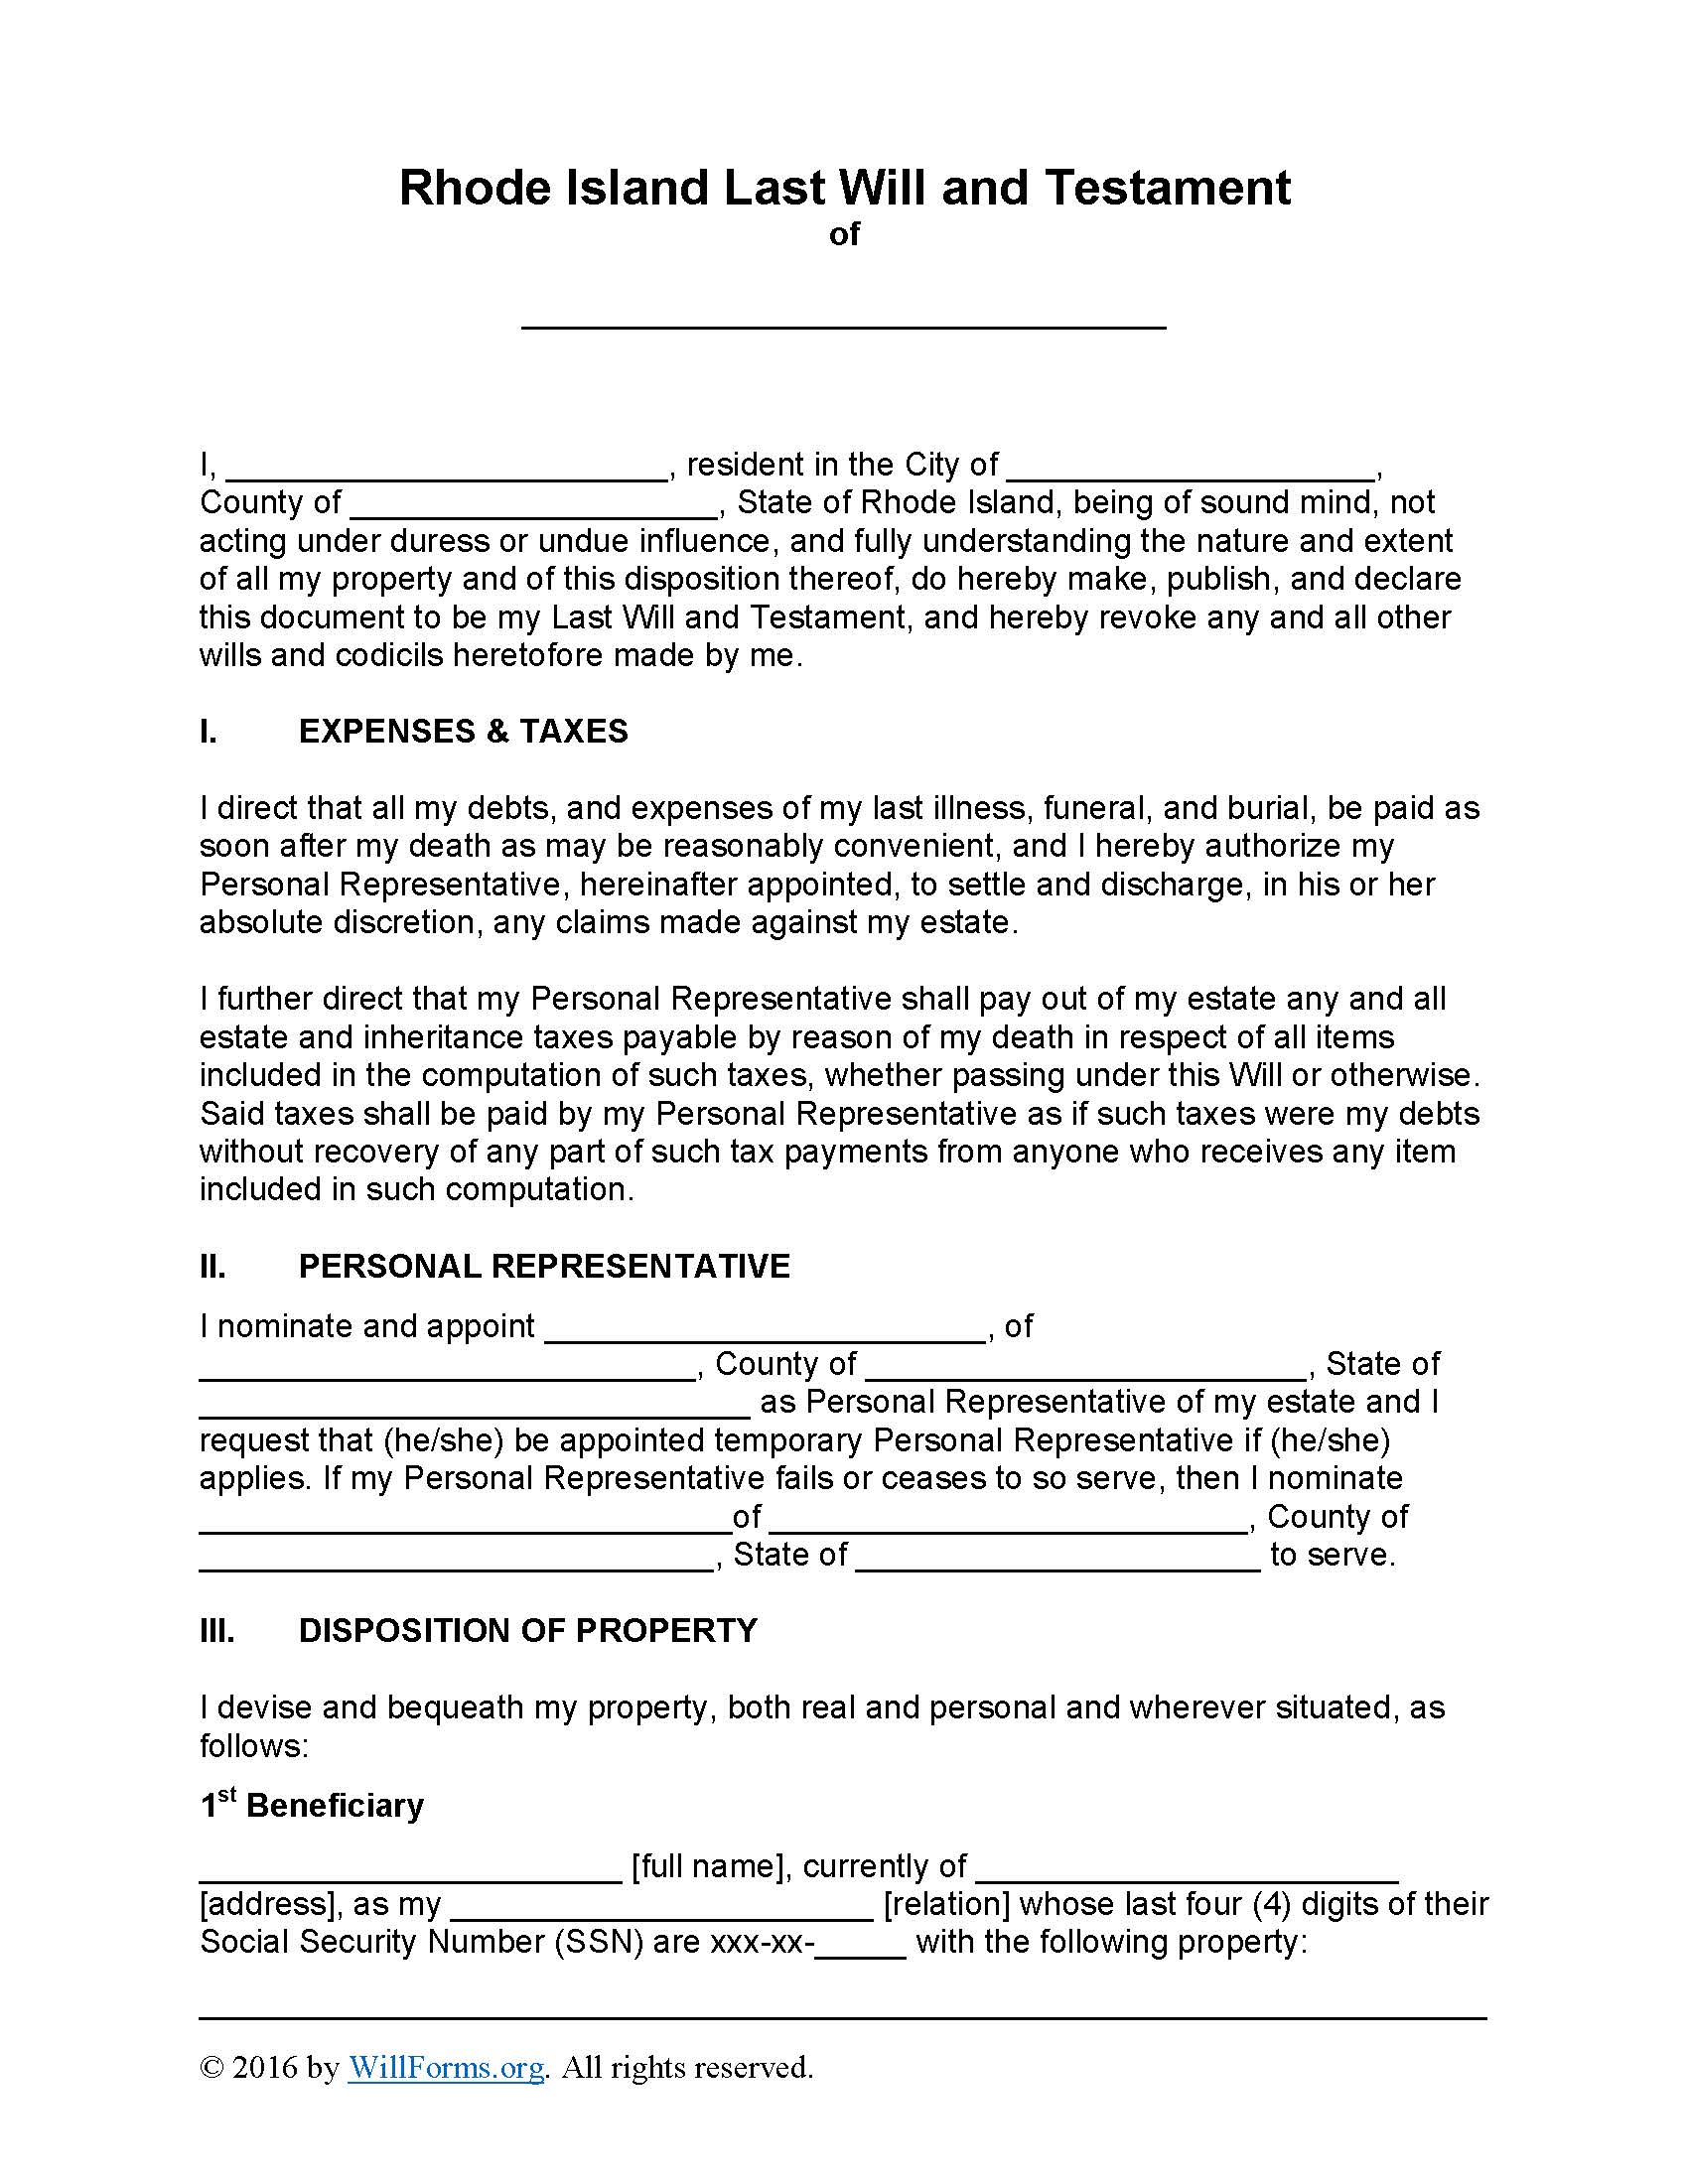 Rhode Island Last Will and Testament Form